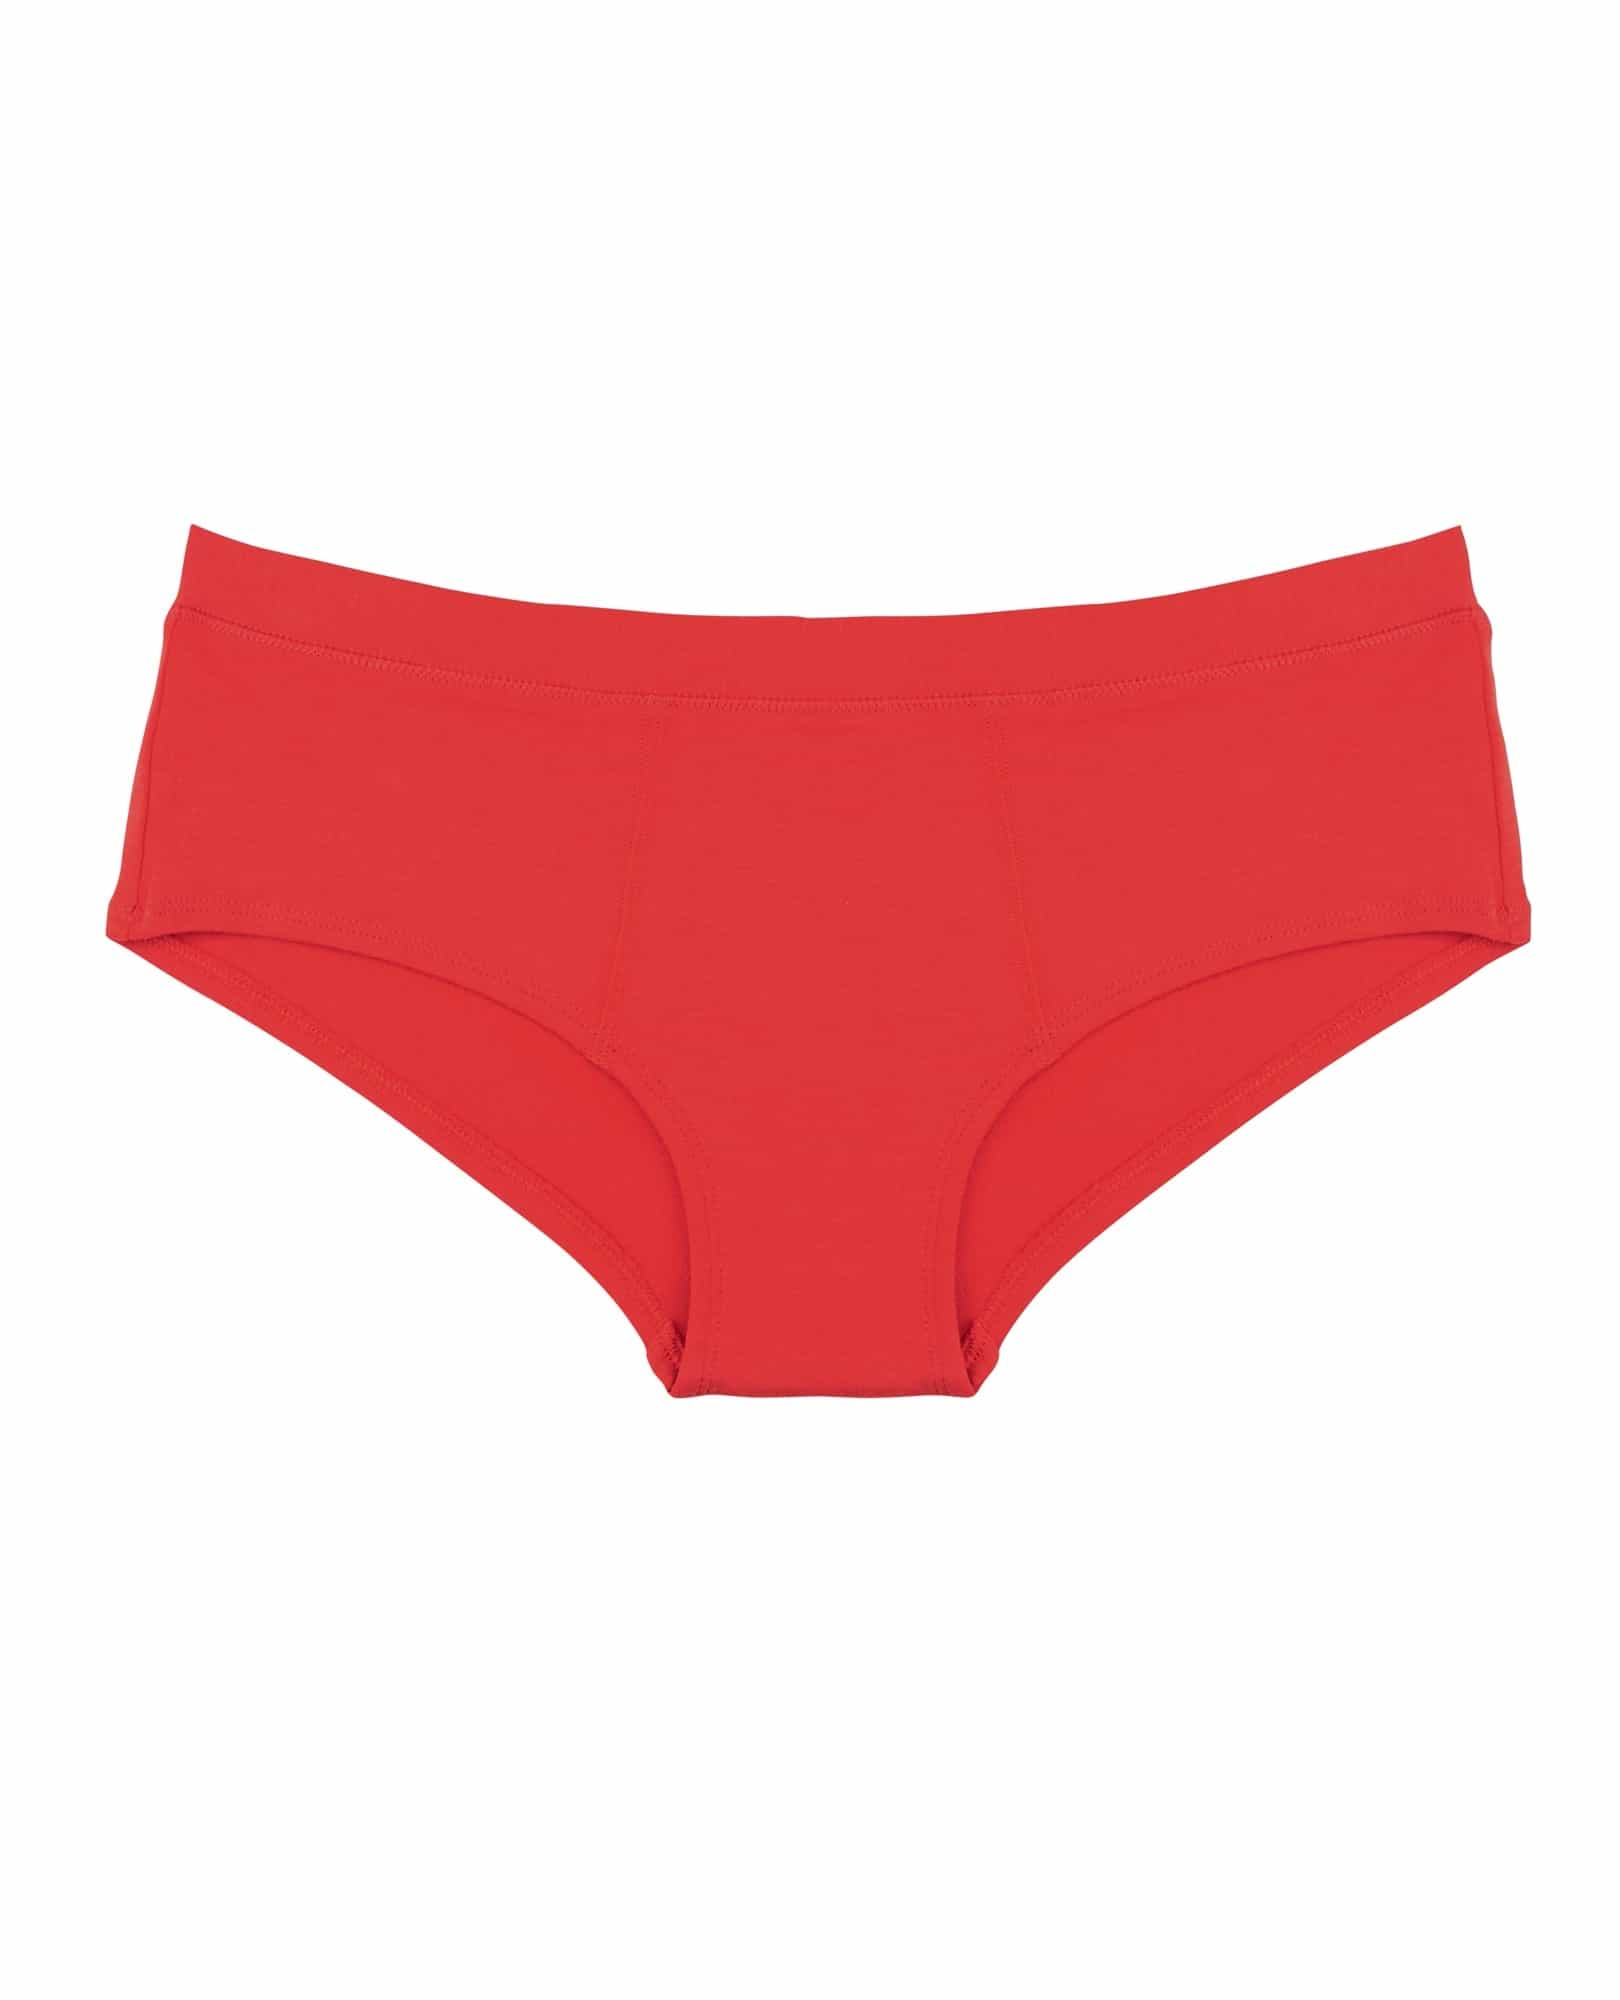 Product Name: *Hipster Broadband Panty (Pack Of 3)